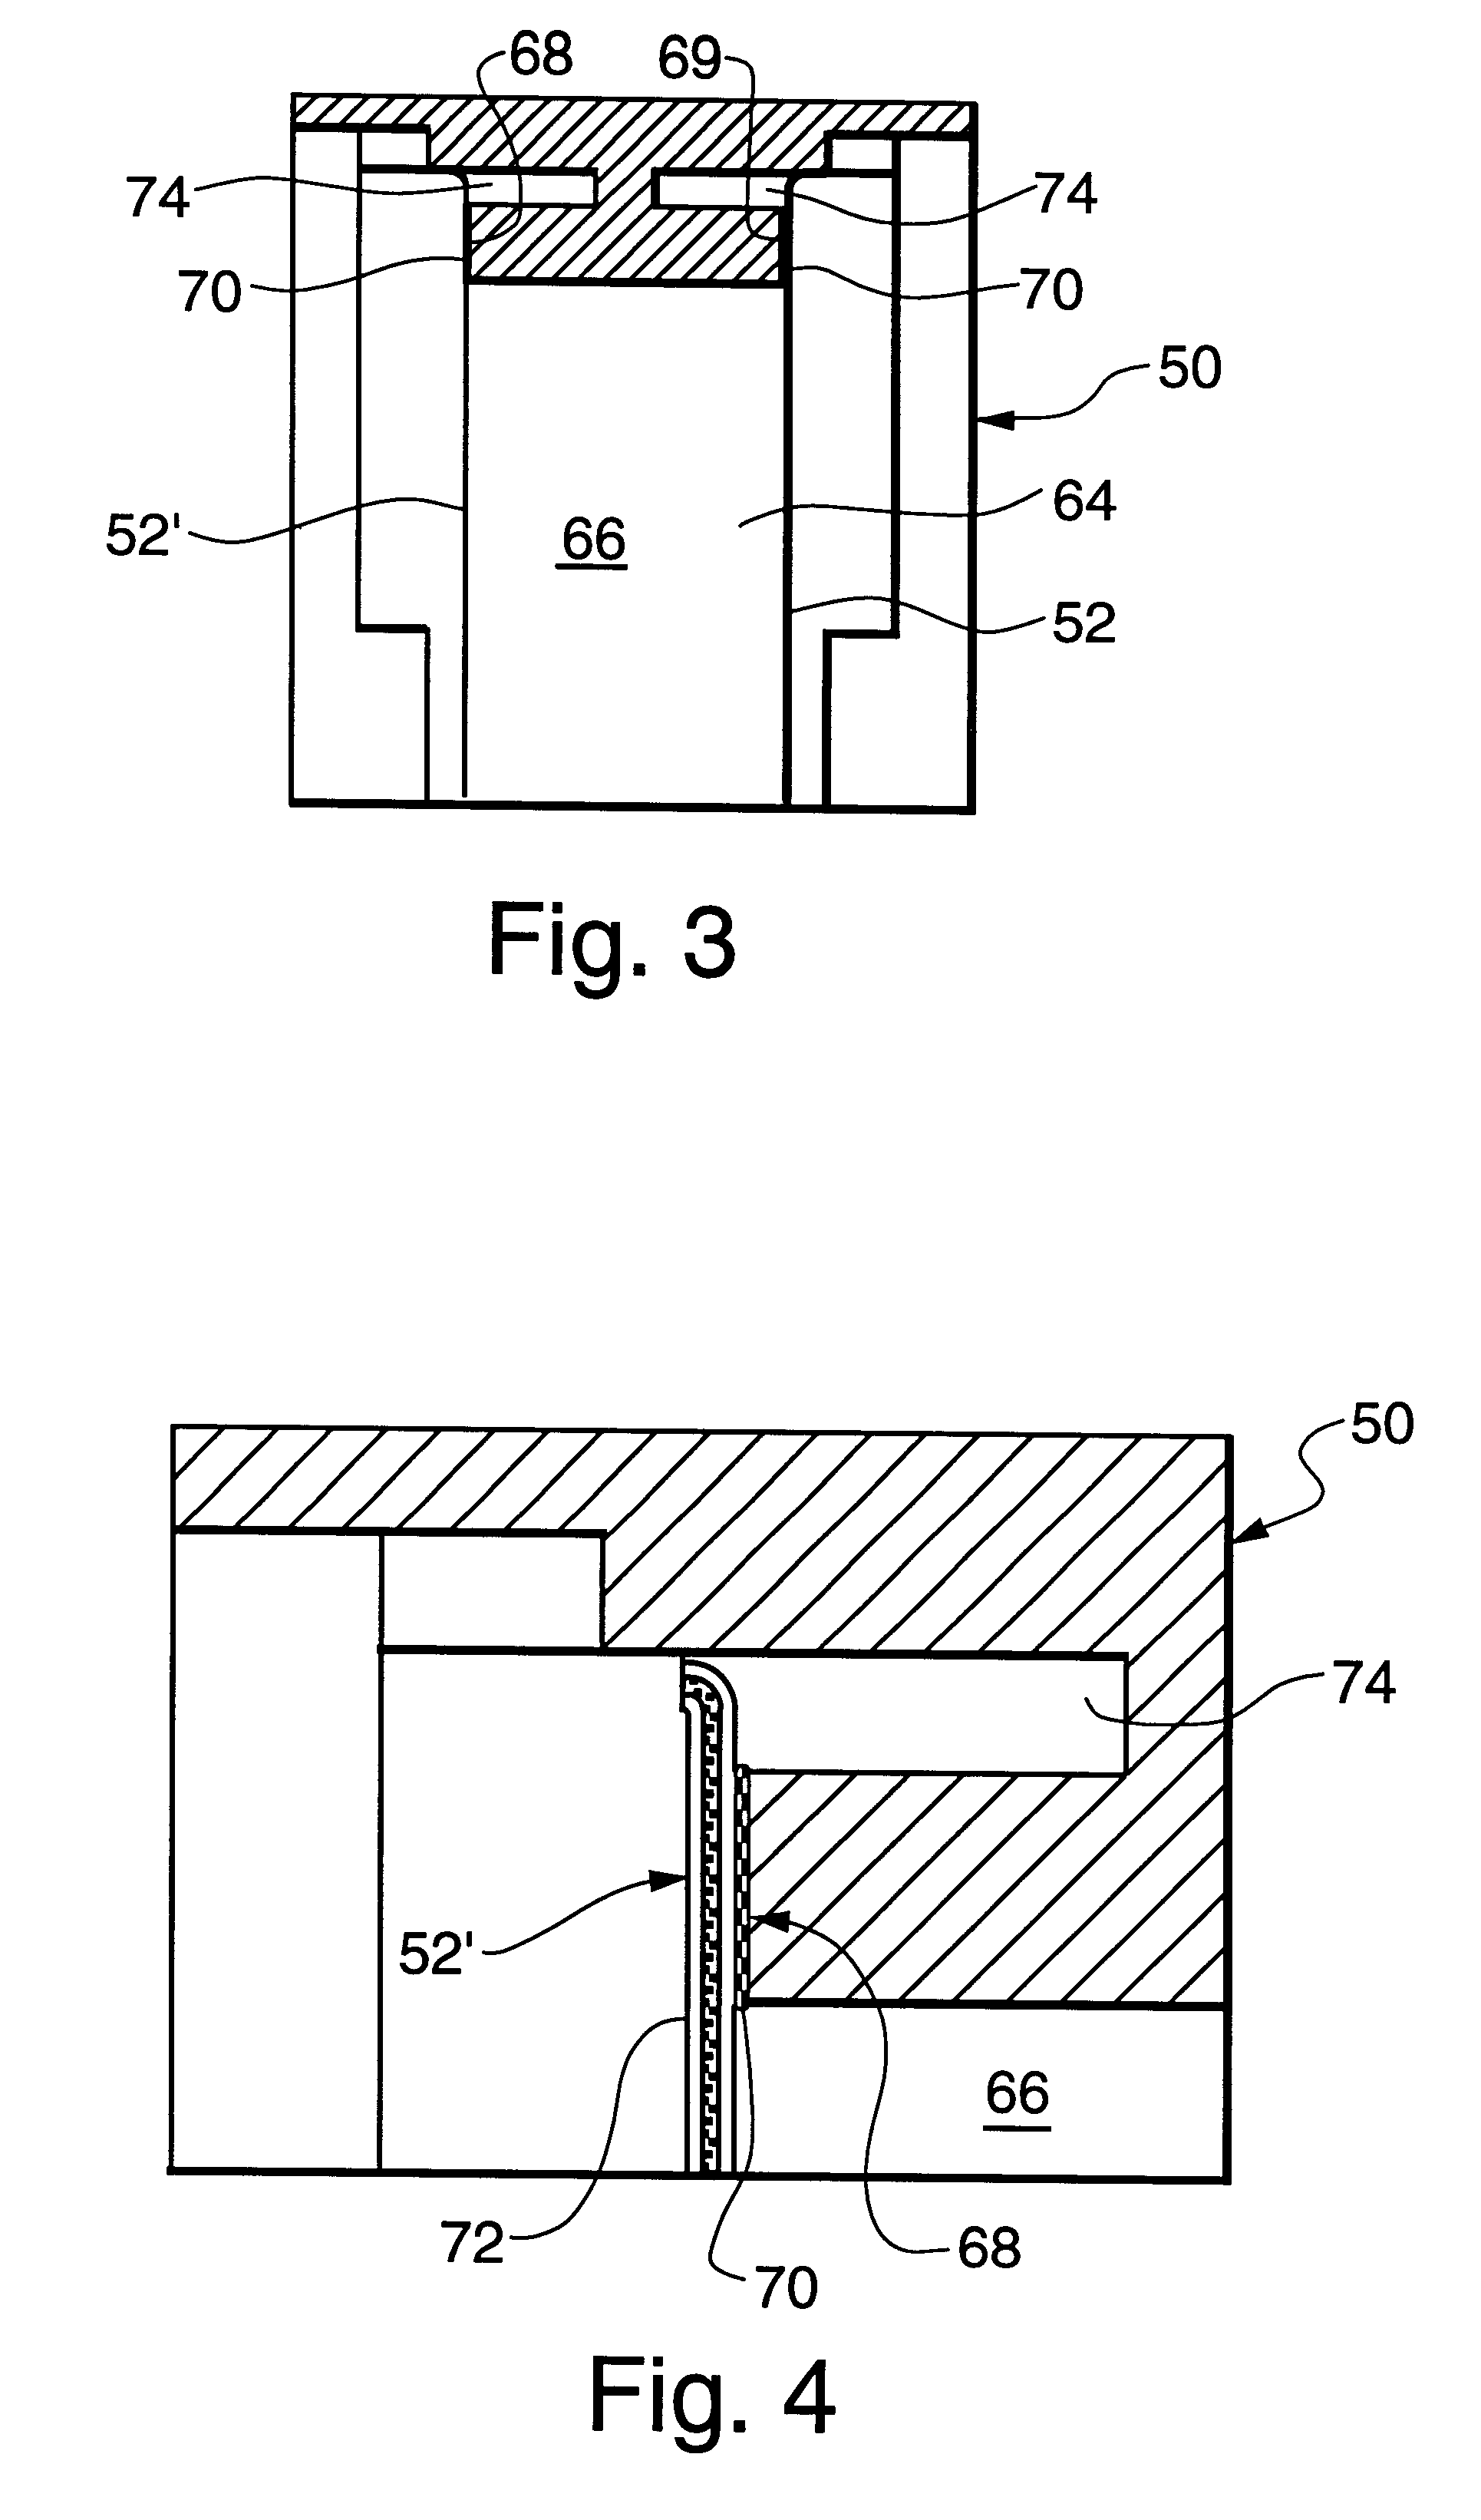 Print head cartridge and method of making a print head cartridge by one-shot injection molding